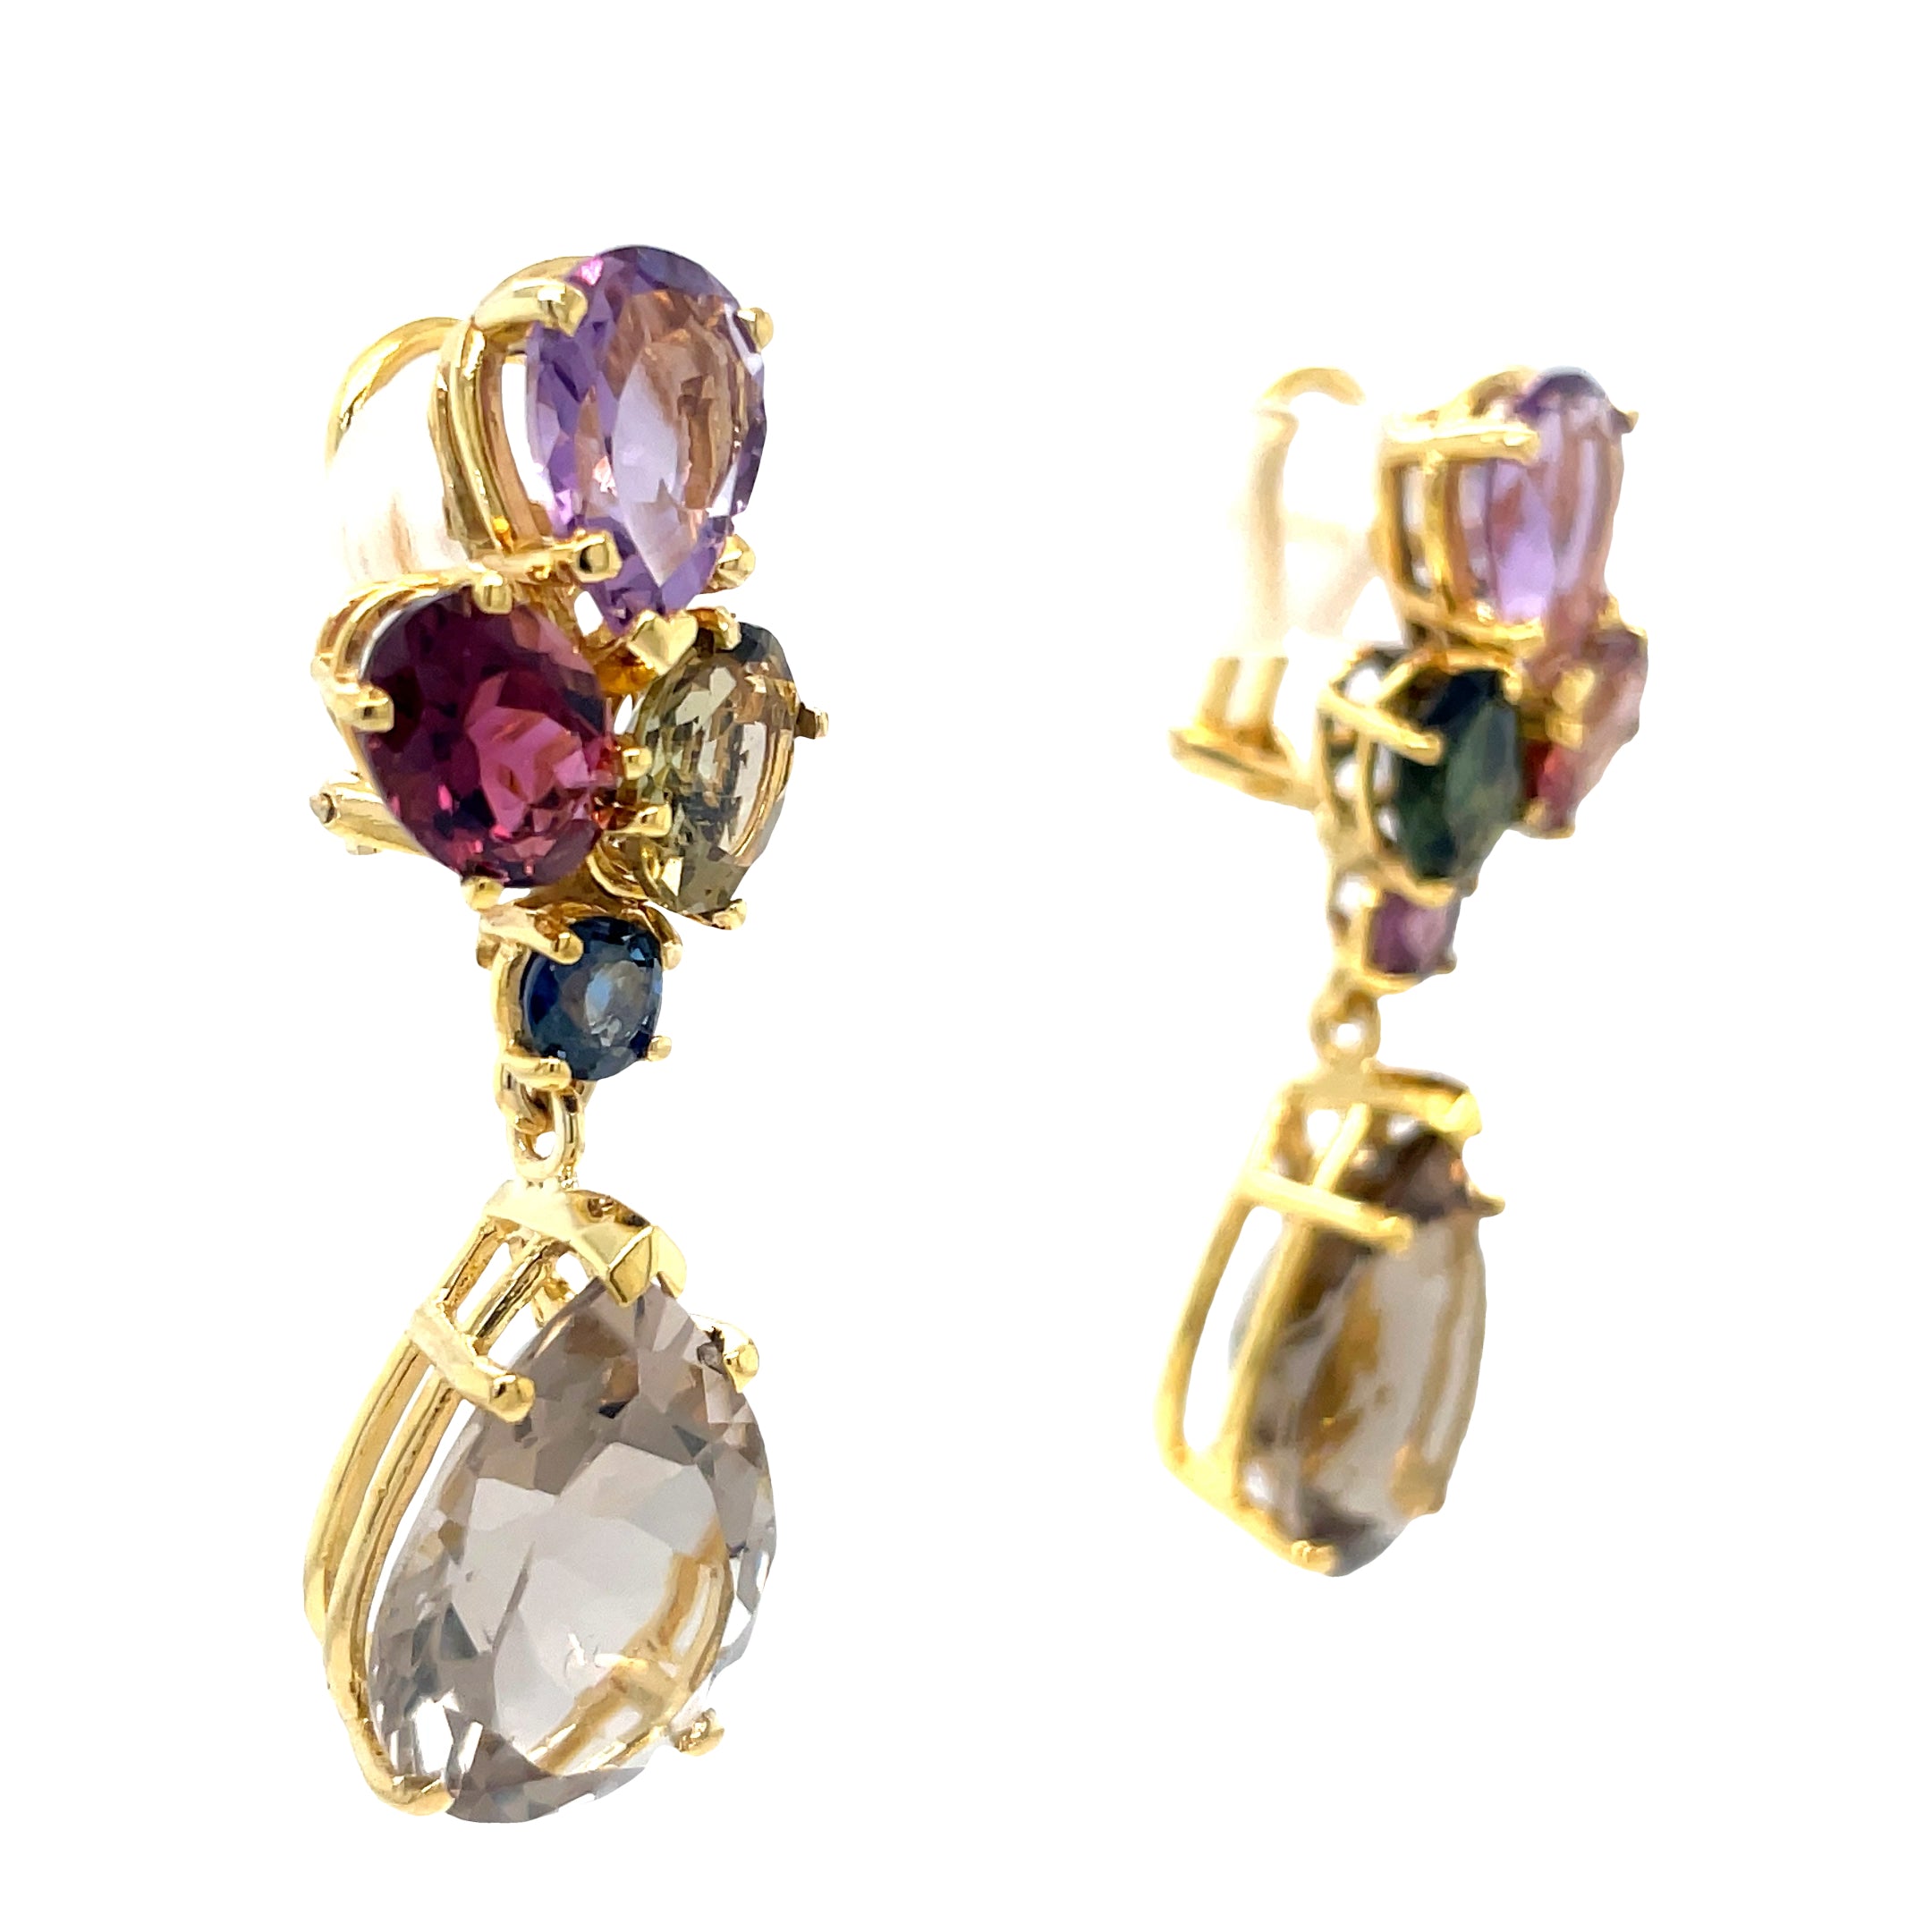 Experience elegance with these stunning 14k yellow gold Tourmaline &amp; Amethyst Drop Earrings. The secure omega clip provides comfort and ease, while the tourmaline and amethyst stones offer a touch of natural beauty. Perfect for any occasion, these earrings will elevate any outfit and make you feel confident and chic.